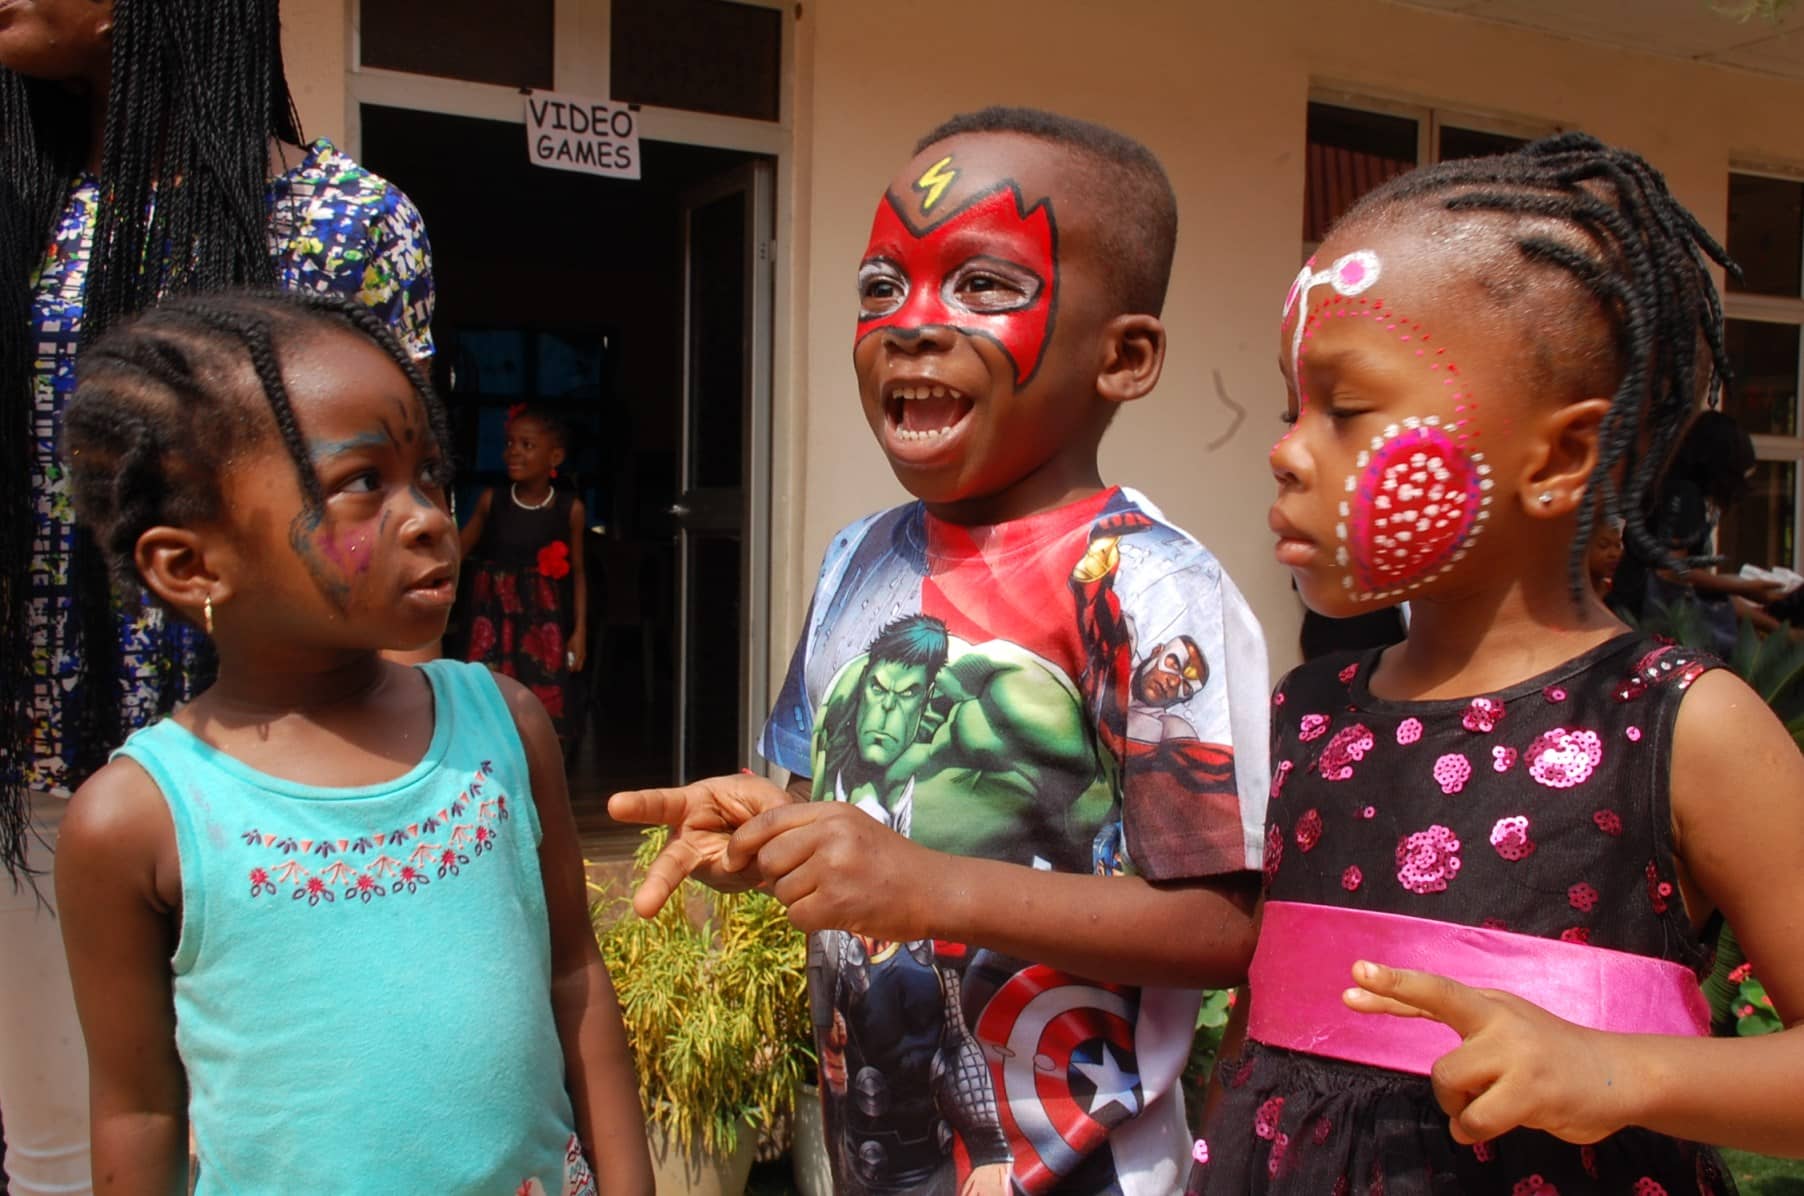 Excited children showed off their beautifully painted faces